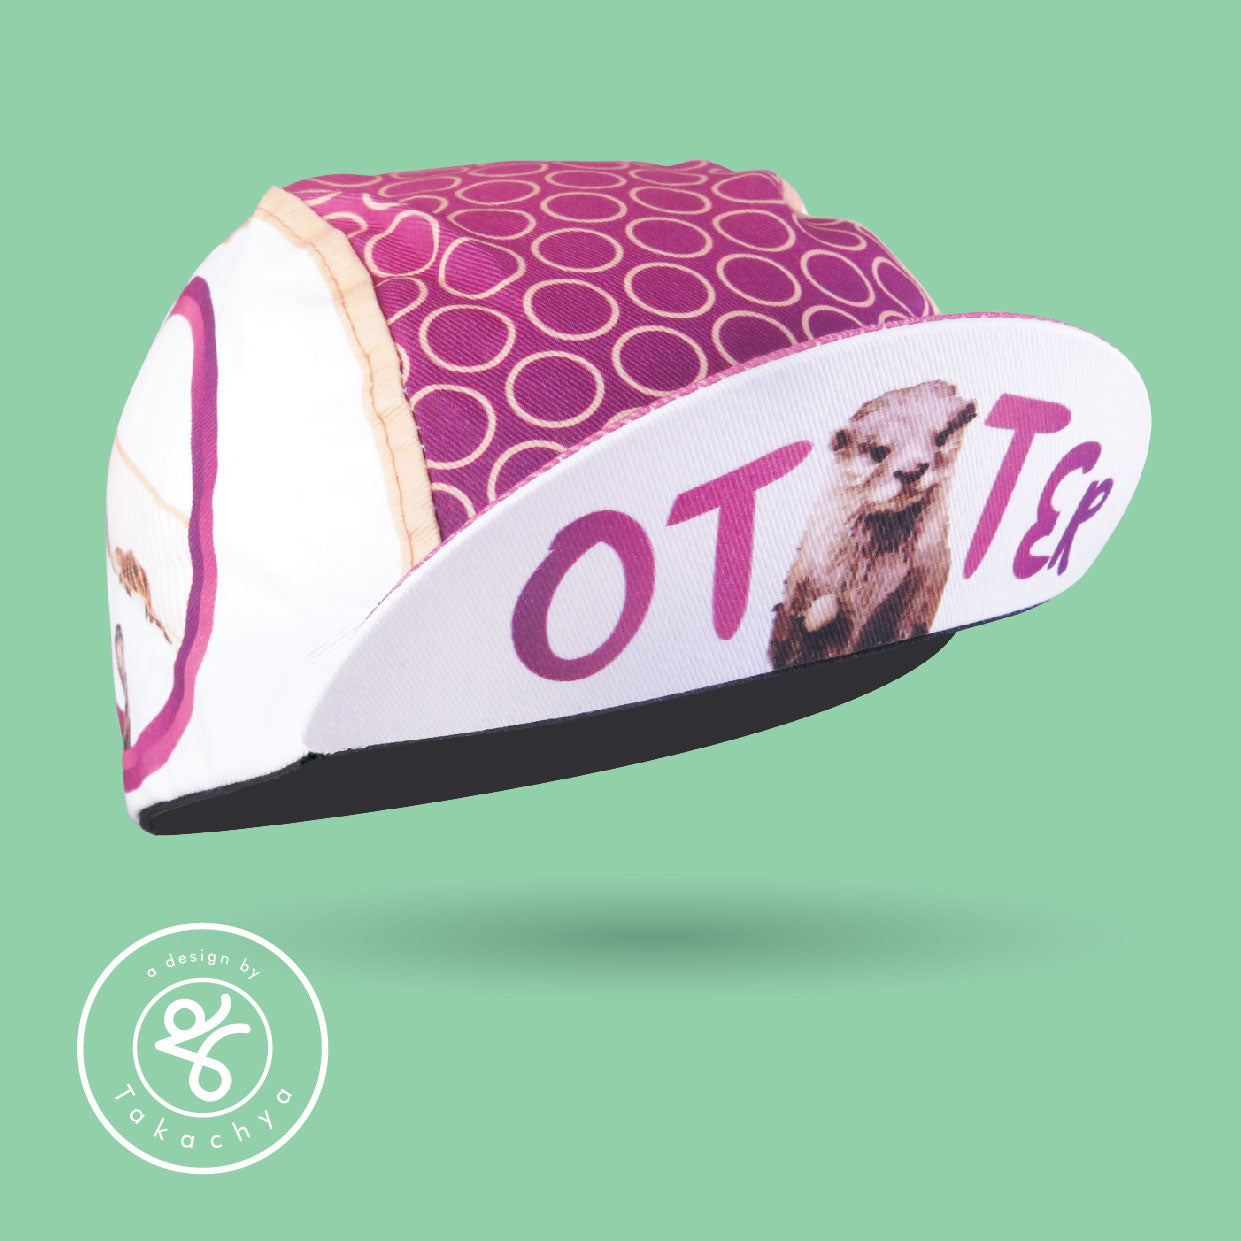 Voideck Otter - A Design by Takachya Cycling Cap